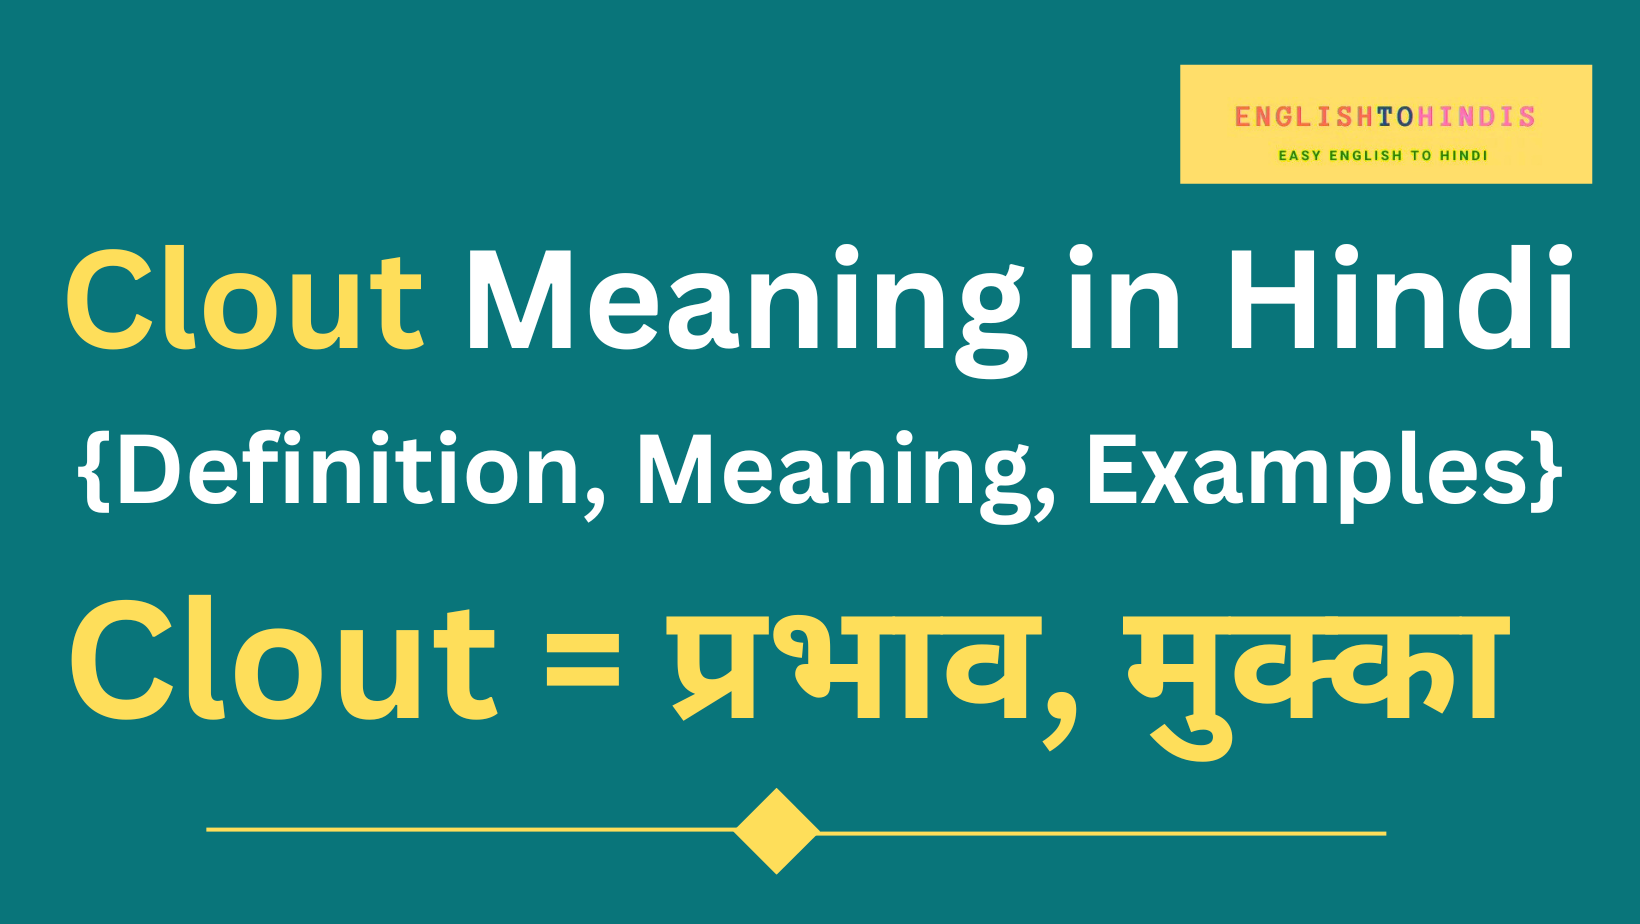 Clout Meaning in Hindi